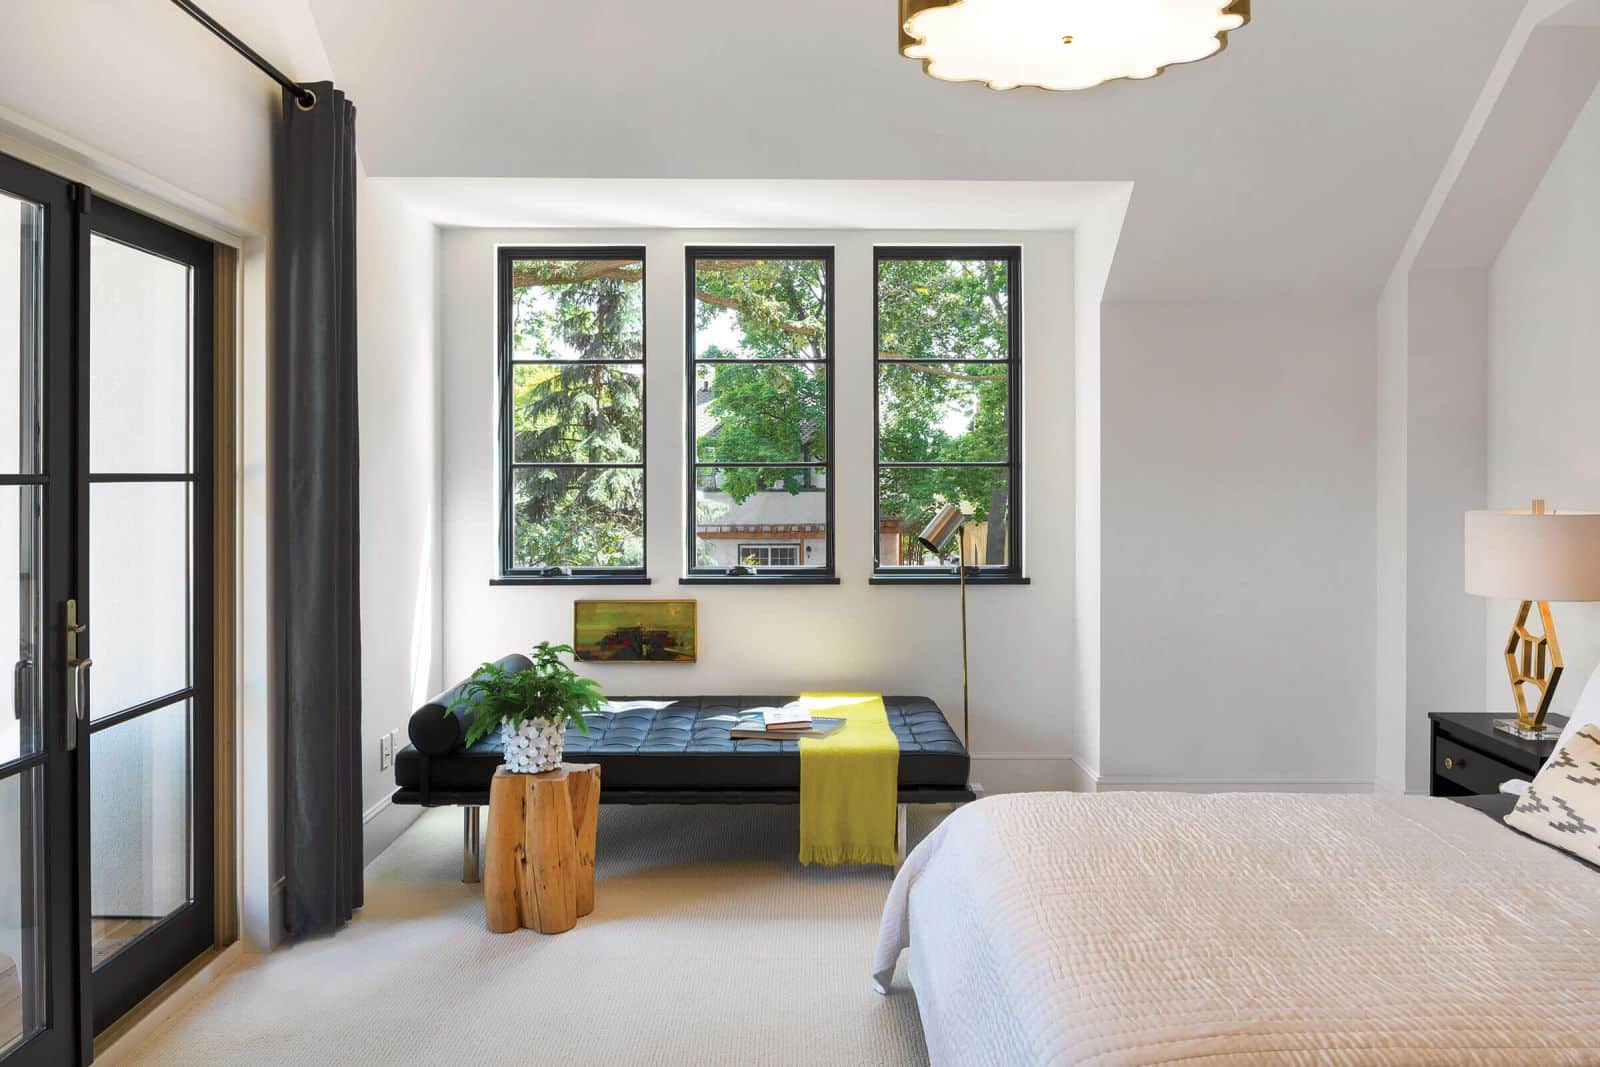 A room with three windows showing elevate casement at its finest.